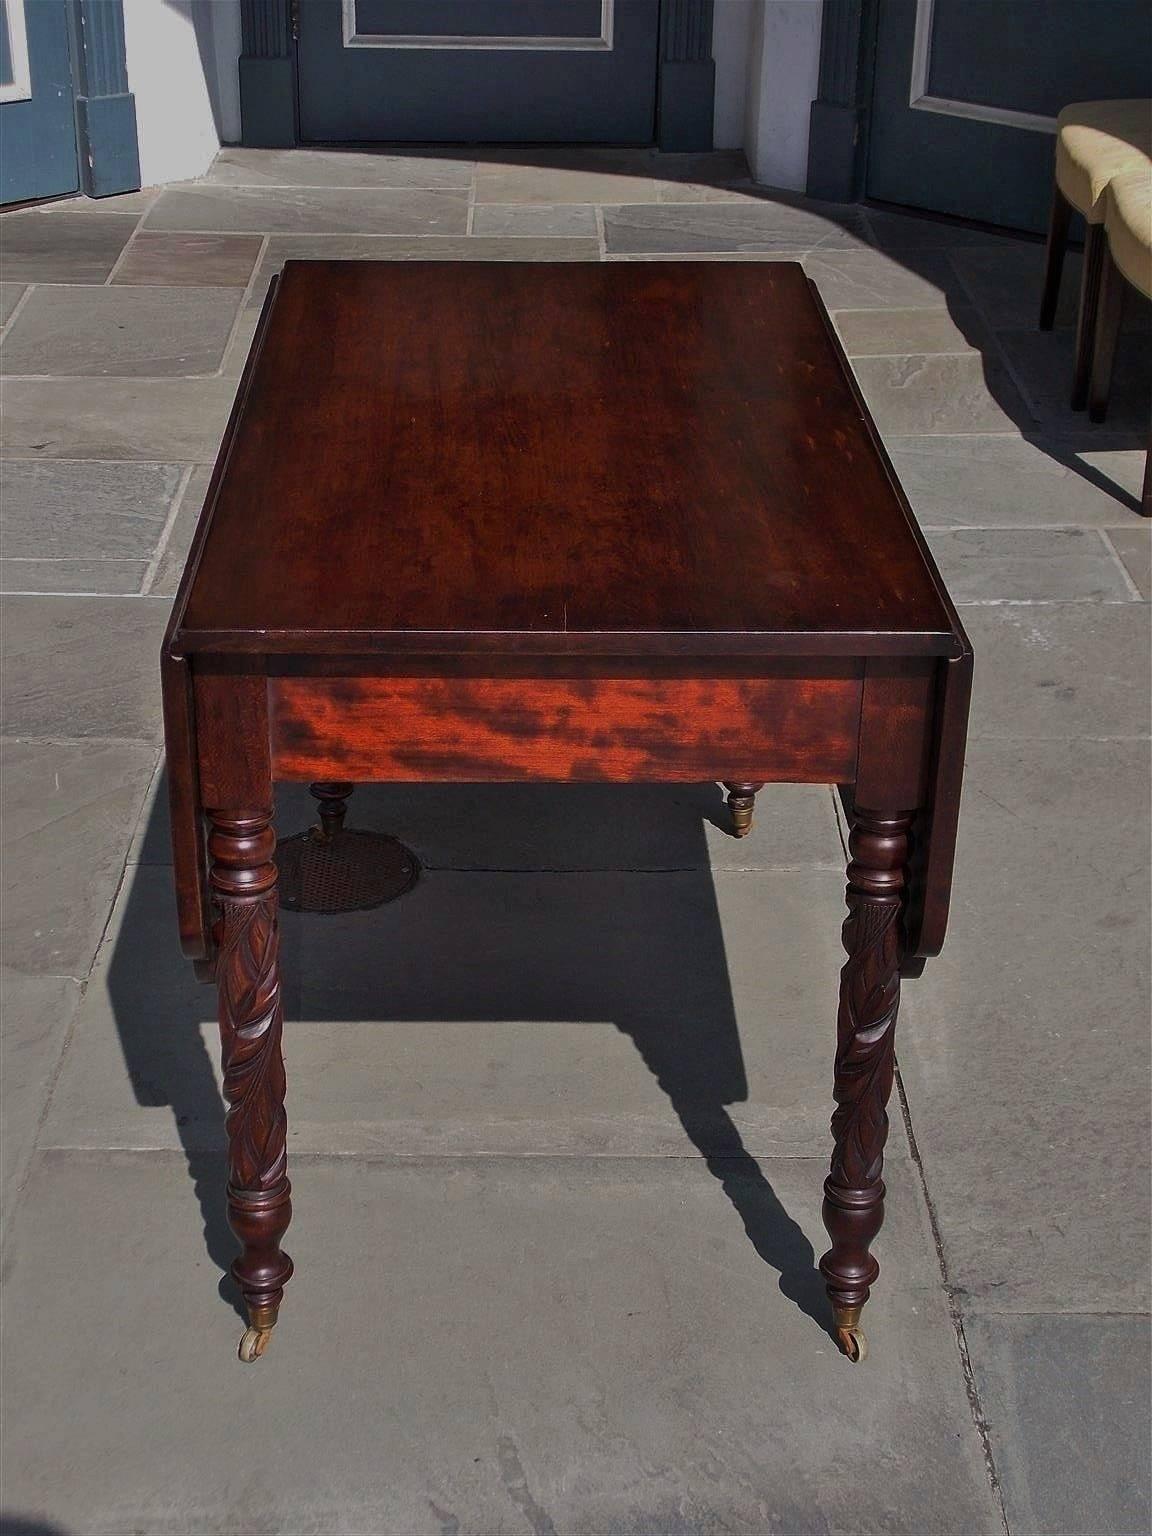 American Sheraton cherry table with a one board top, two scalloped drop leaves consisting of one board, triangular interior supports, and terminating on acanthus carved legs with the original brass casters, Early 19th century
Measure: Table is 51.75